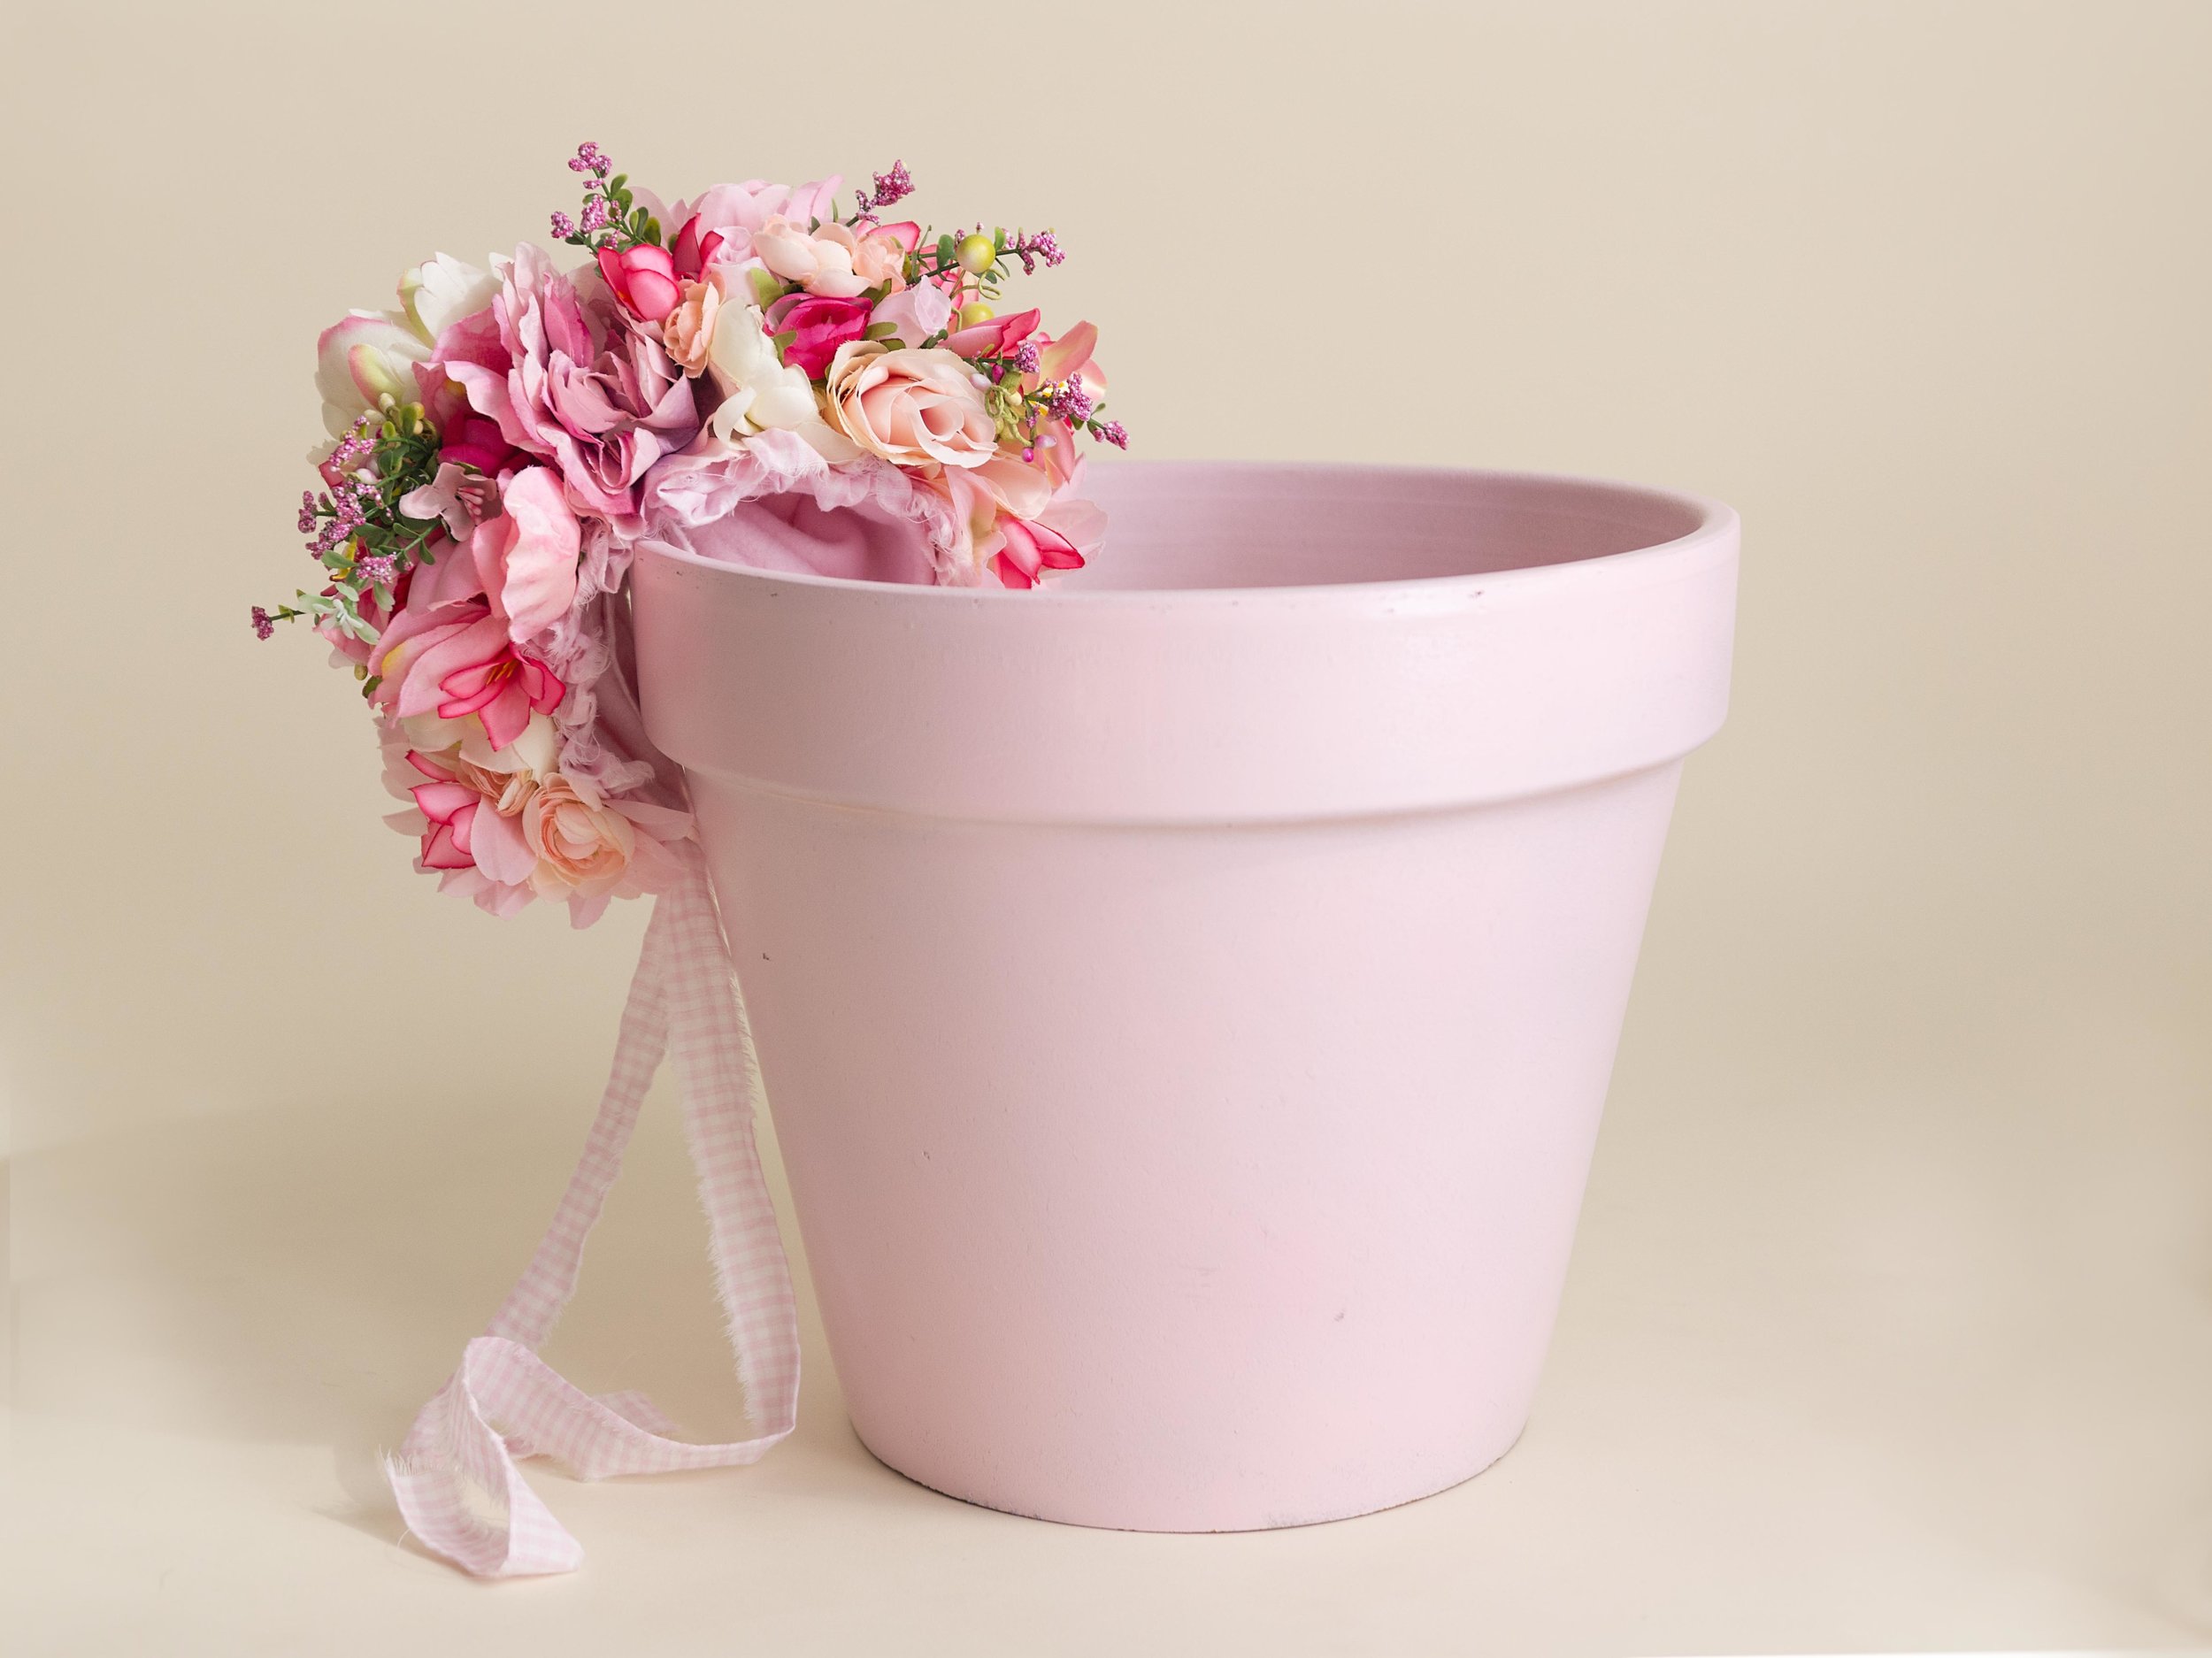  One of our most popular props for baby girls is this flower pot and flower bonnet.&nbsp; The girls look darling in the pot with the flower bonnet on.&nbsp; 